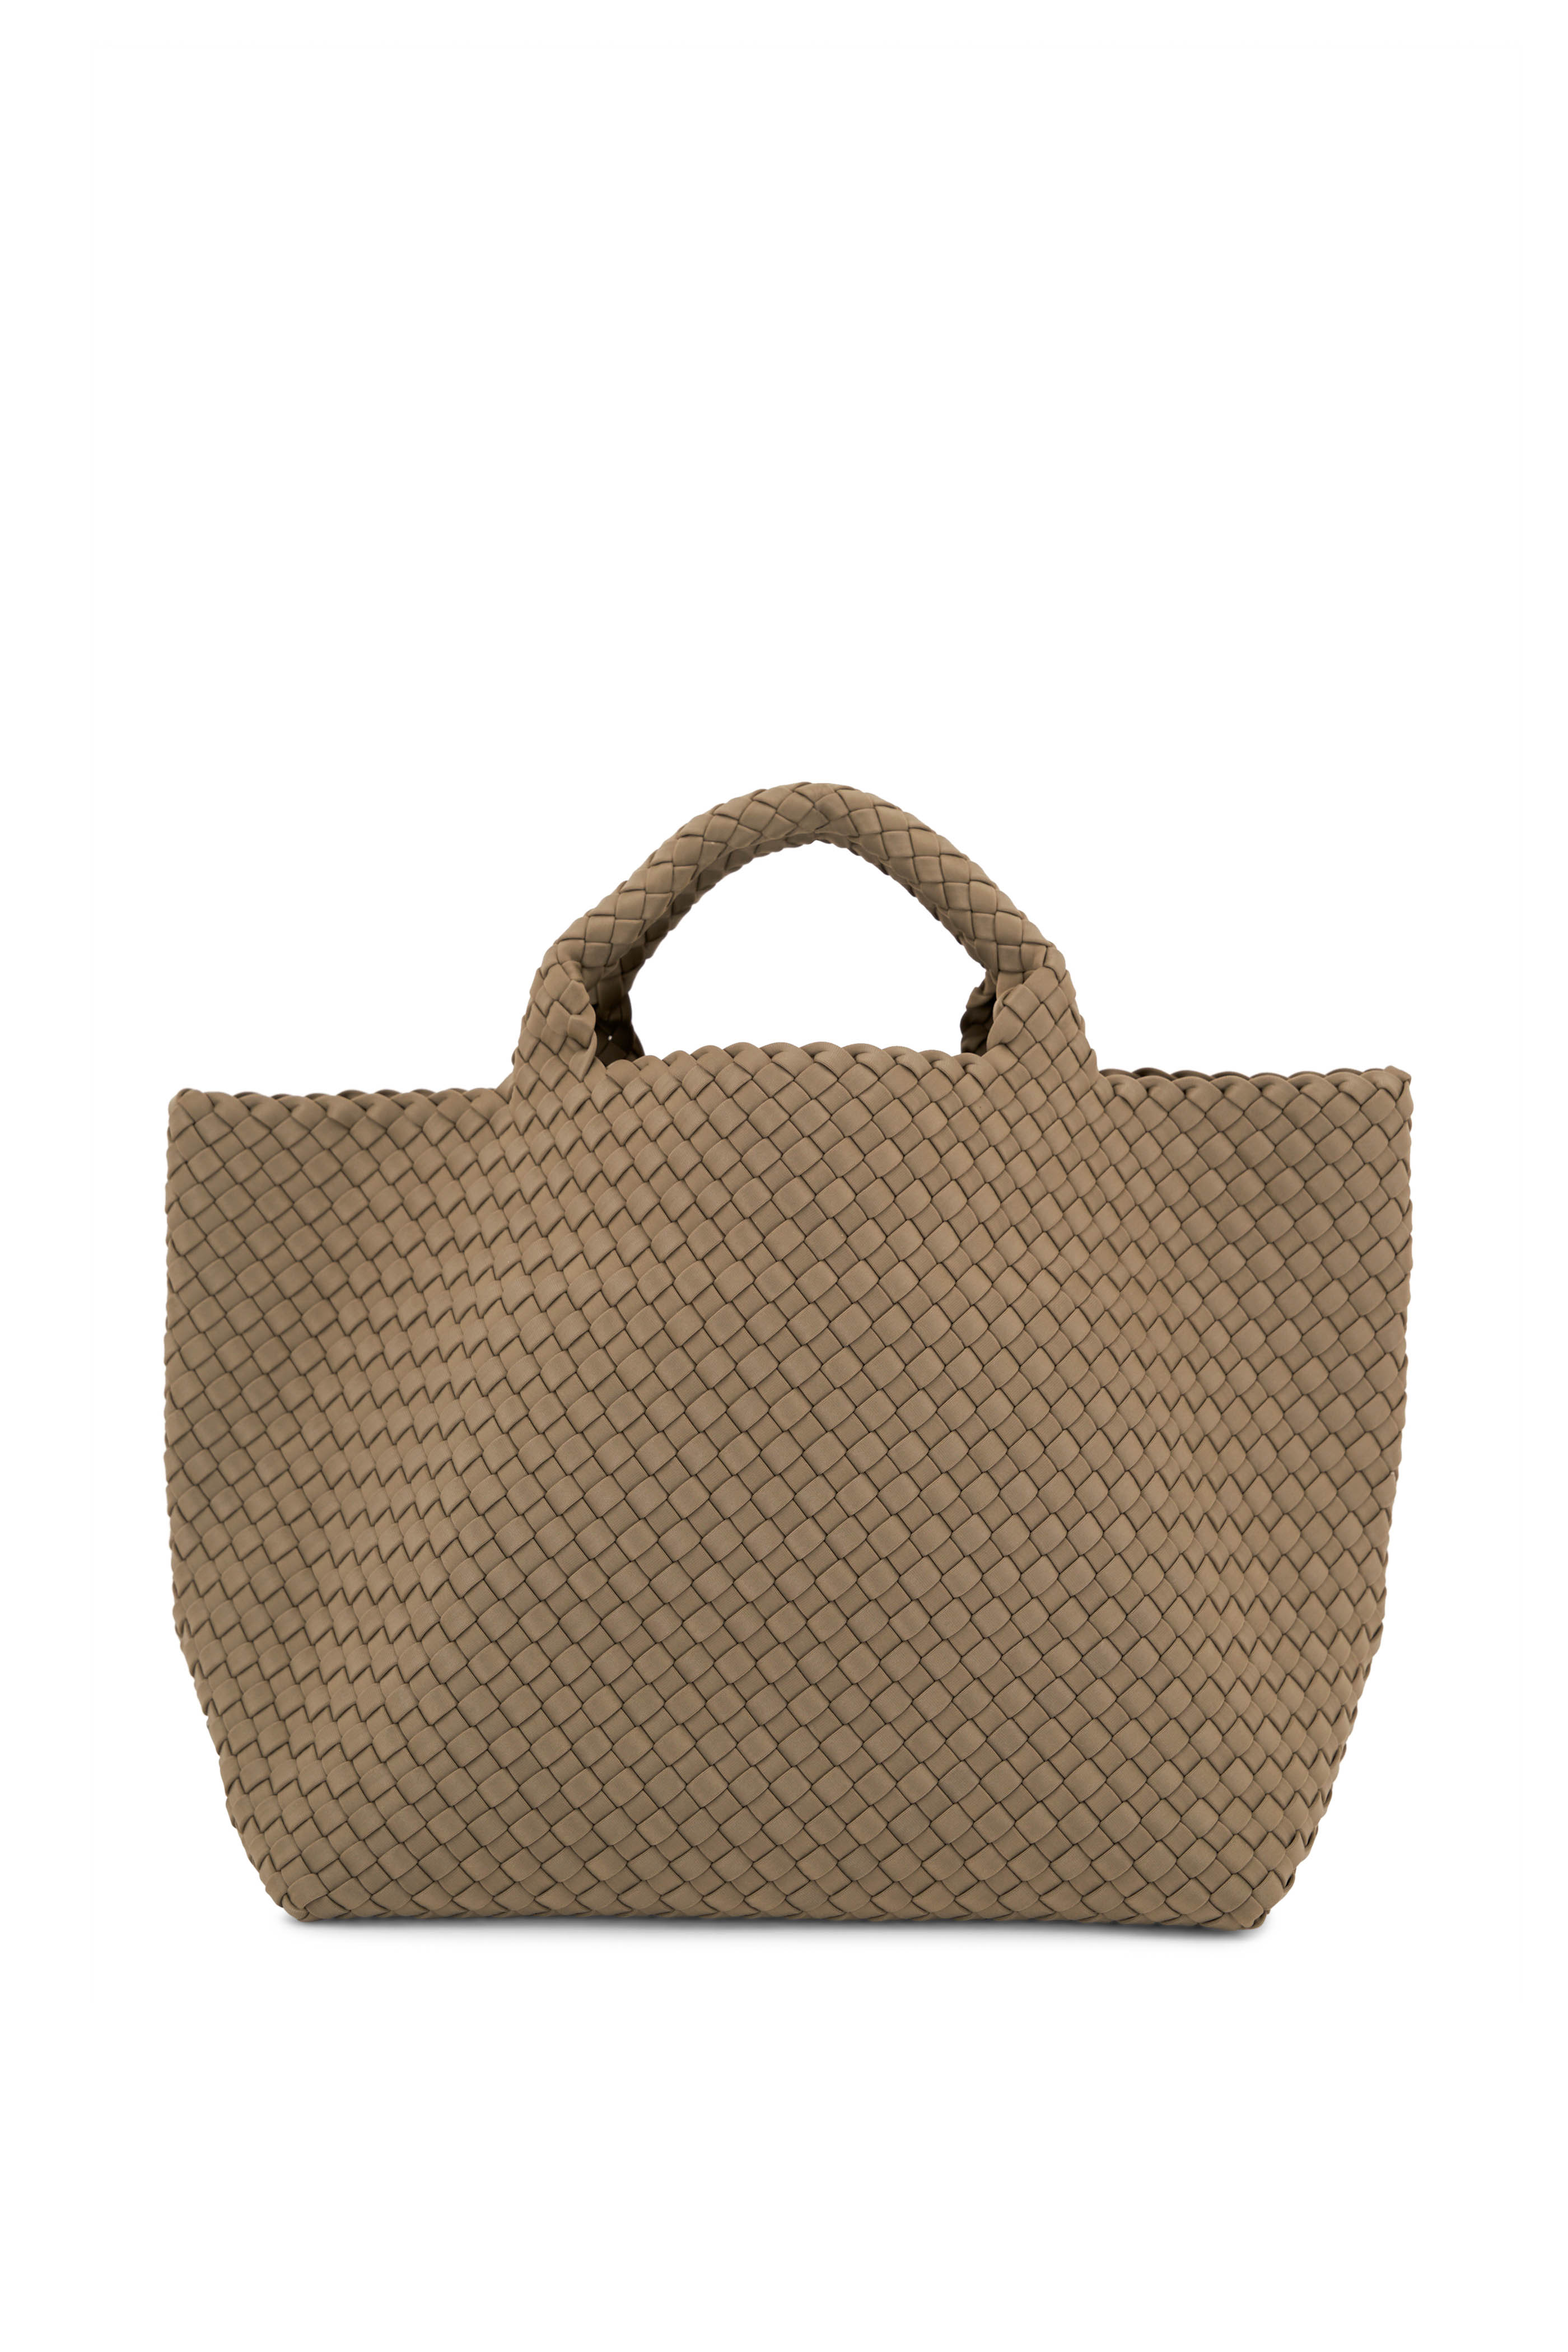 St. Barths Large Tote - Monkee's of Raleigh